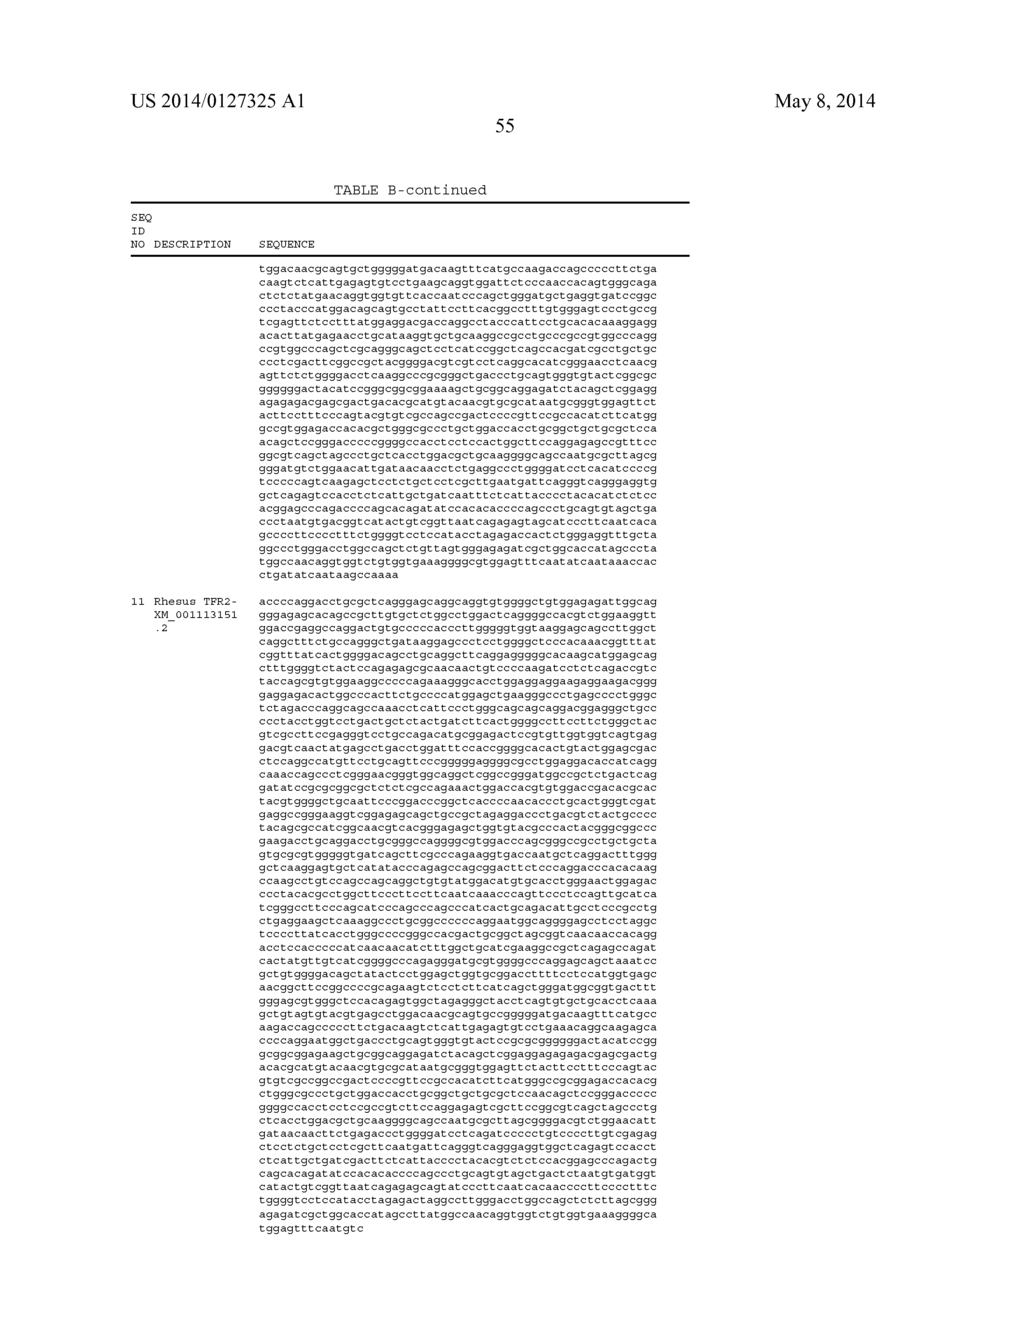 Compositions and Method for Inhibiting Hepcidin Antimicrobial Peptide     (HAMP) or HAMP-Related Gene Expression - diagram, schematic, and image 66